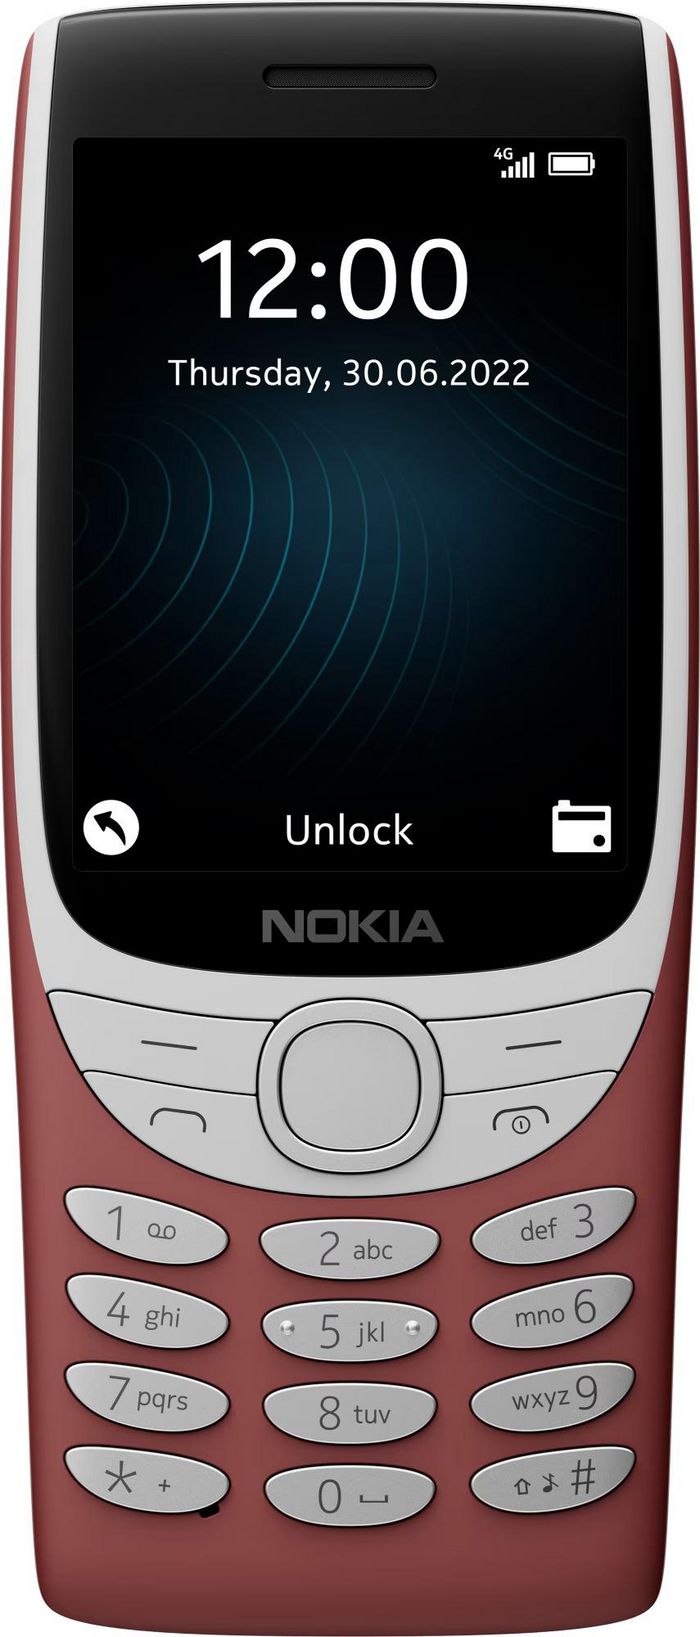 Nokia 8210 4G 7.11 Cm (2.8") 107 G Red Entry-Level Phone - W128442576